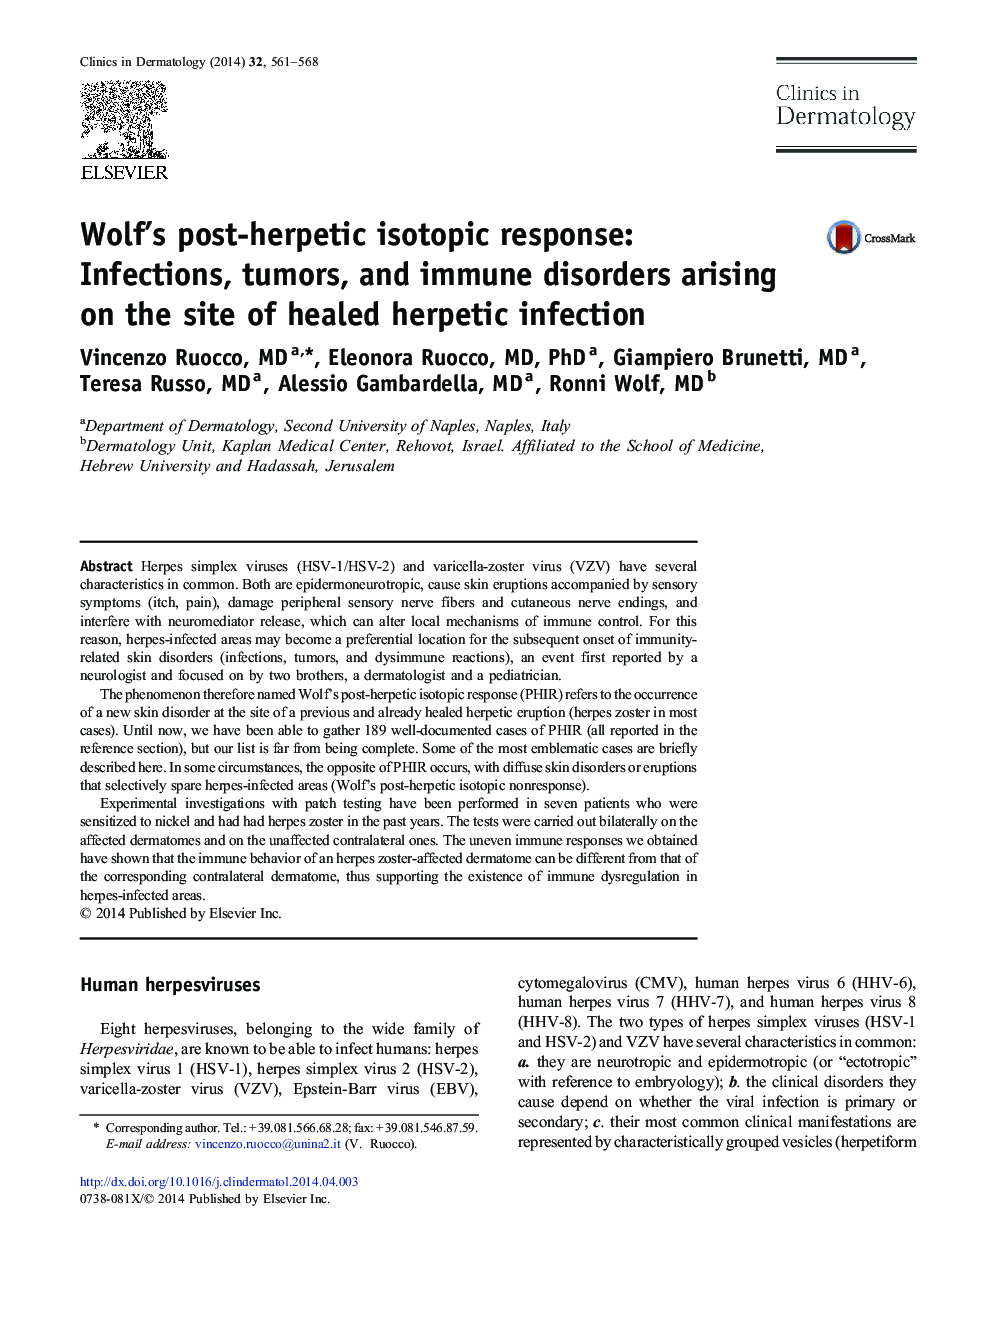 Wolf’s post-herpetic isotopic response: Infections, tumors, and immune disorders arising on the site of healed herpetic infection